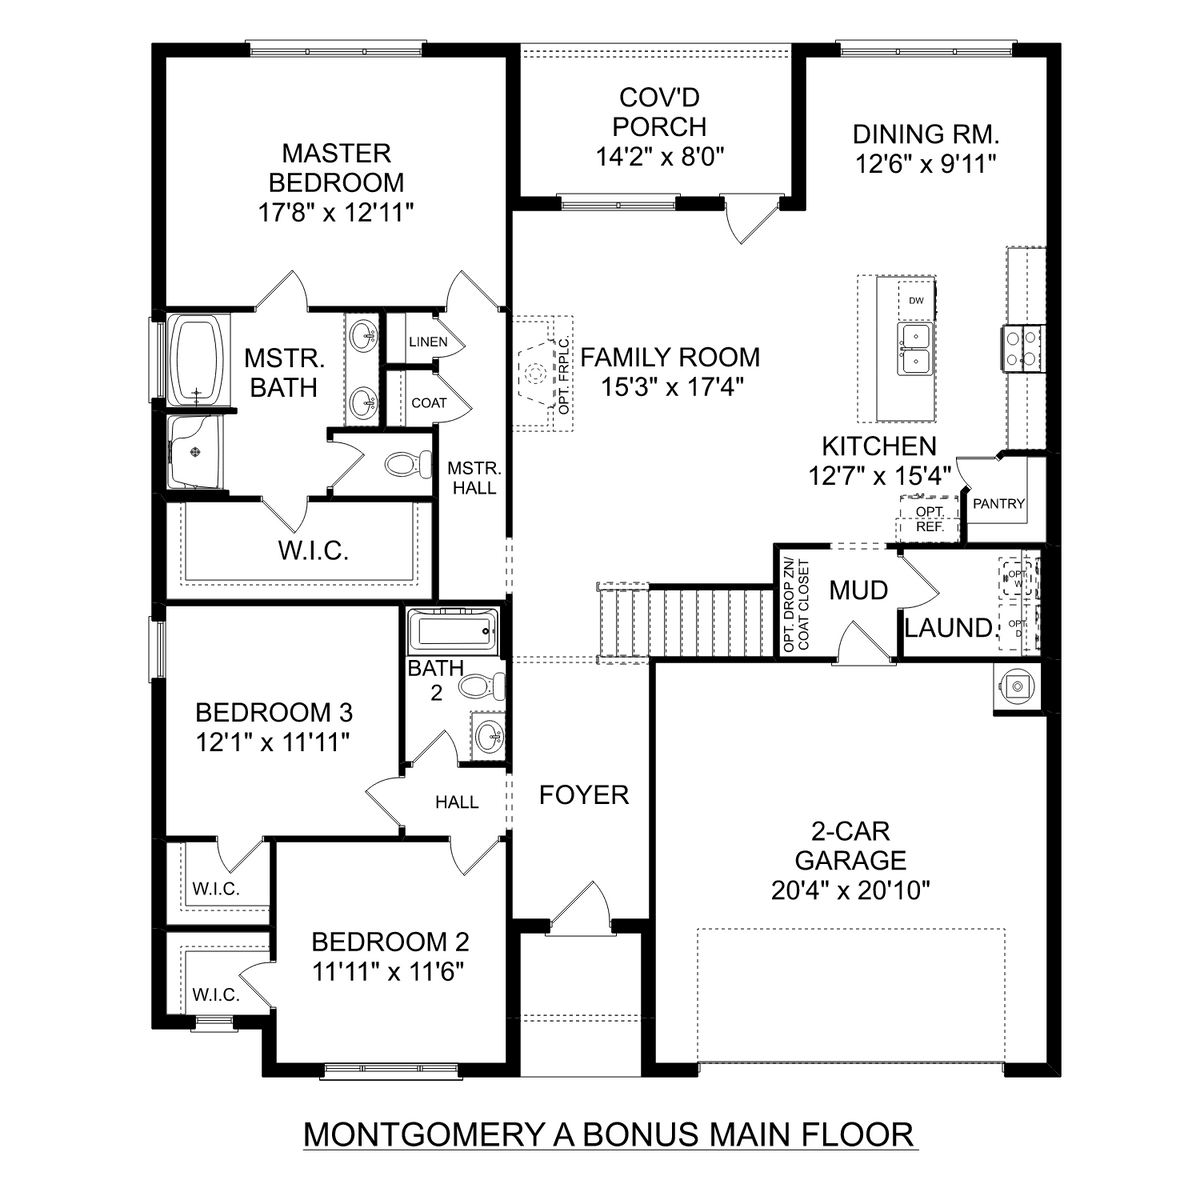 1 - The Montgomery with Bonus floor plan layout for 602 Ronnie Drive SE in Davidson Homes' Cain Park community.